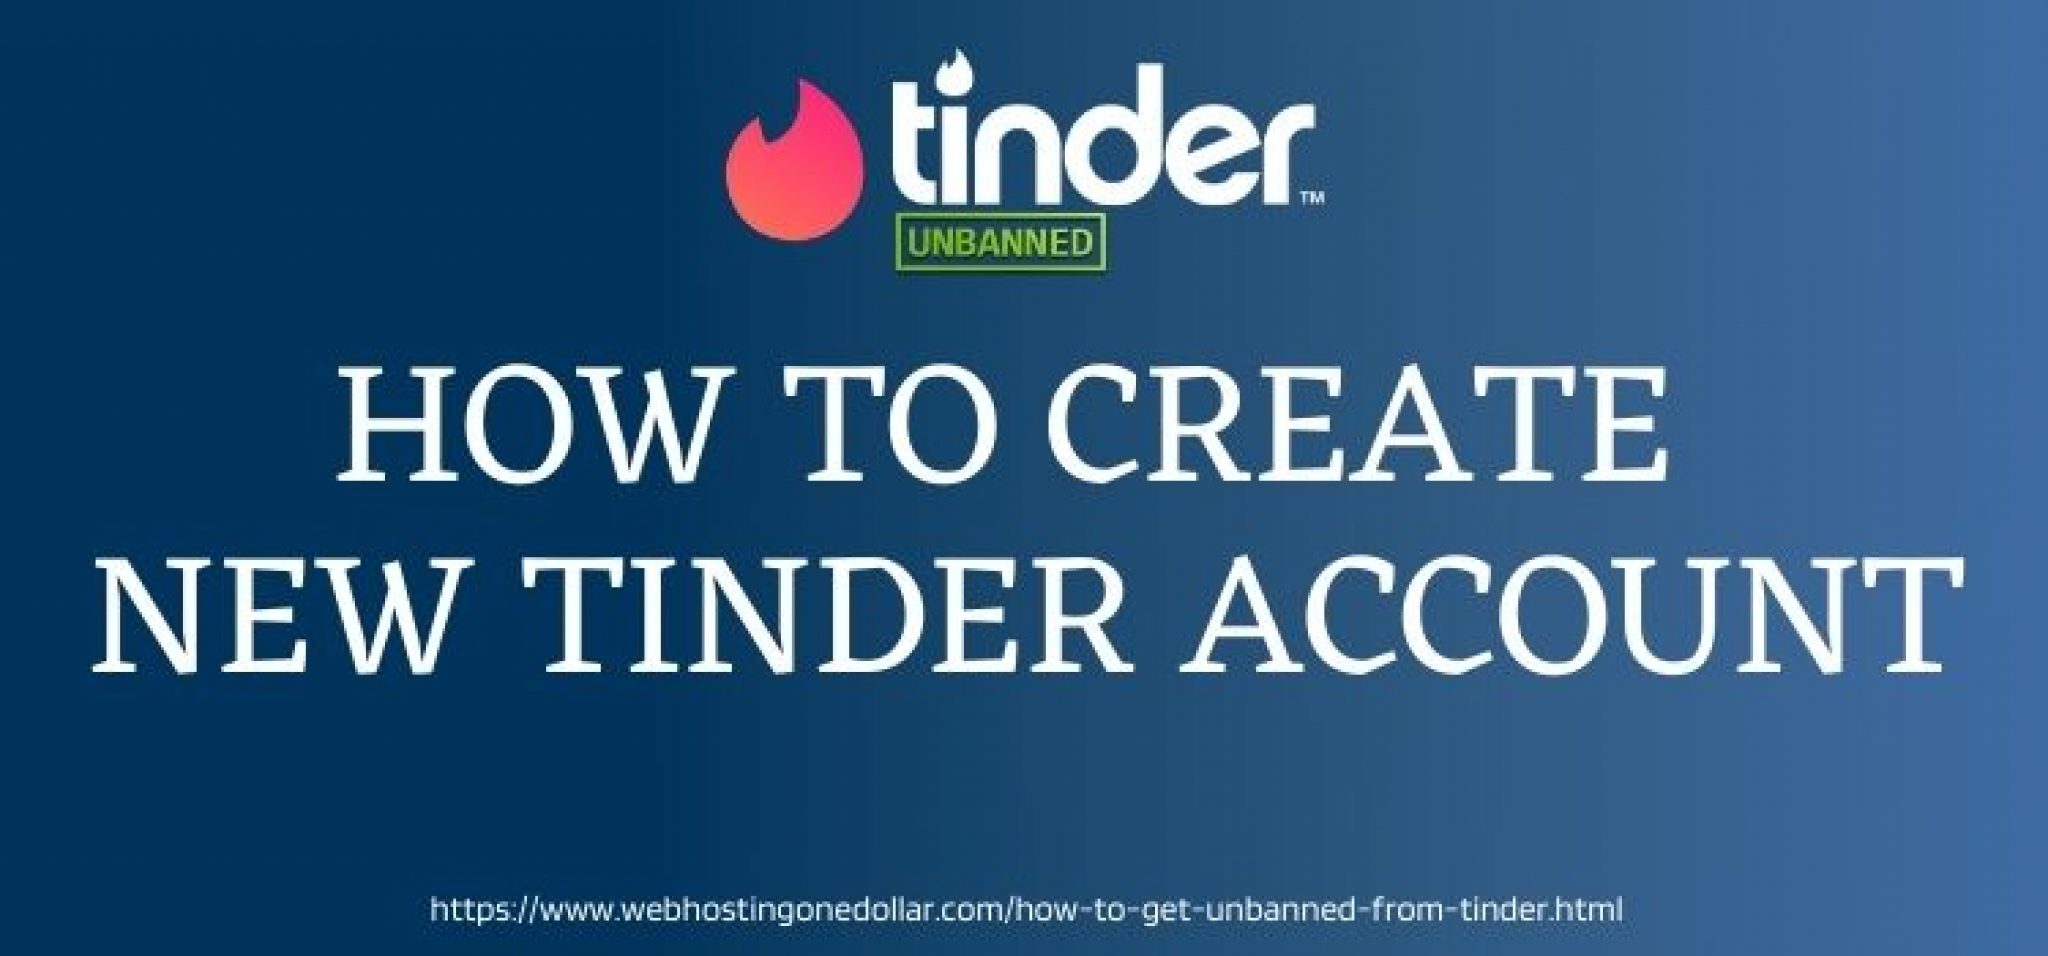 How To Get Unbanned From Tinder 2021 Tinder Ban Appeal!